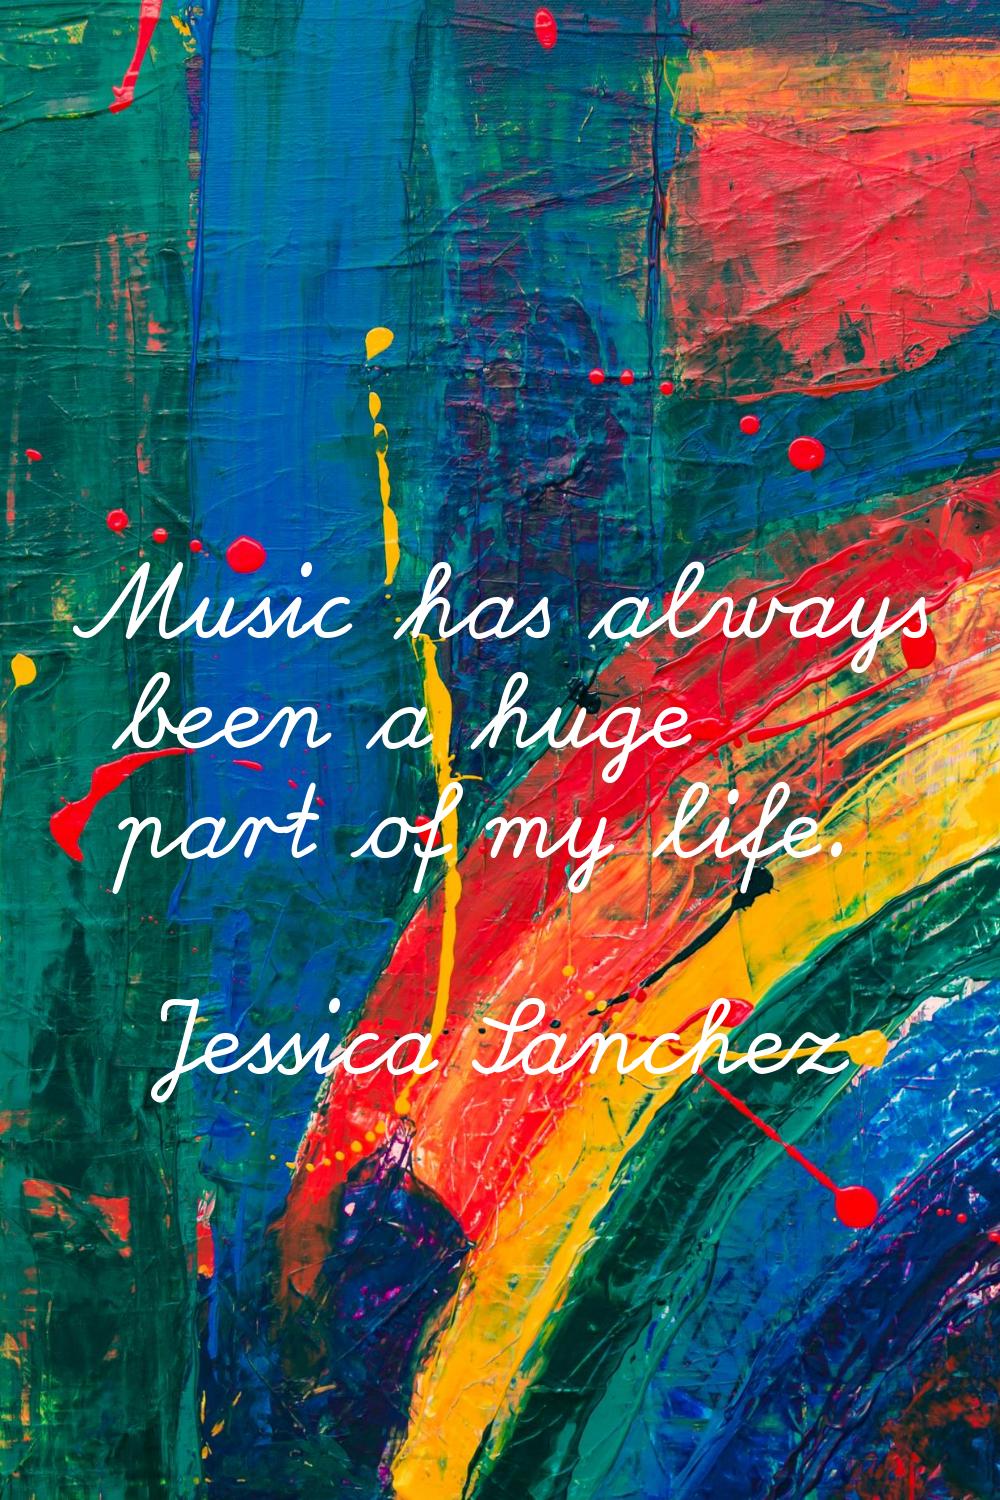 Music has always been a huge part of my life.